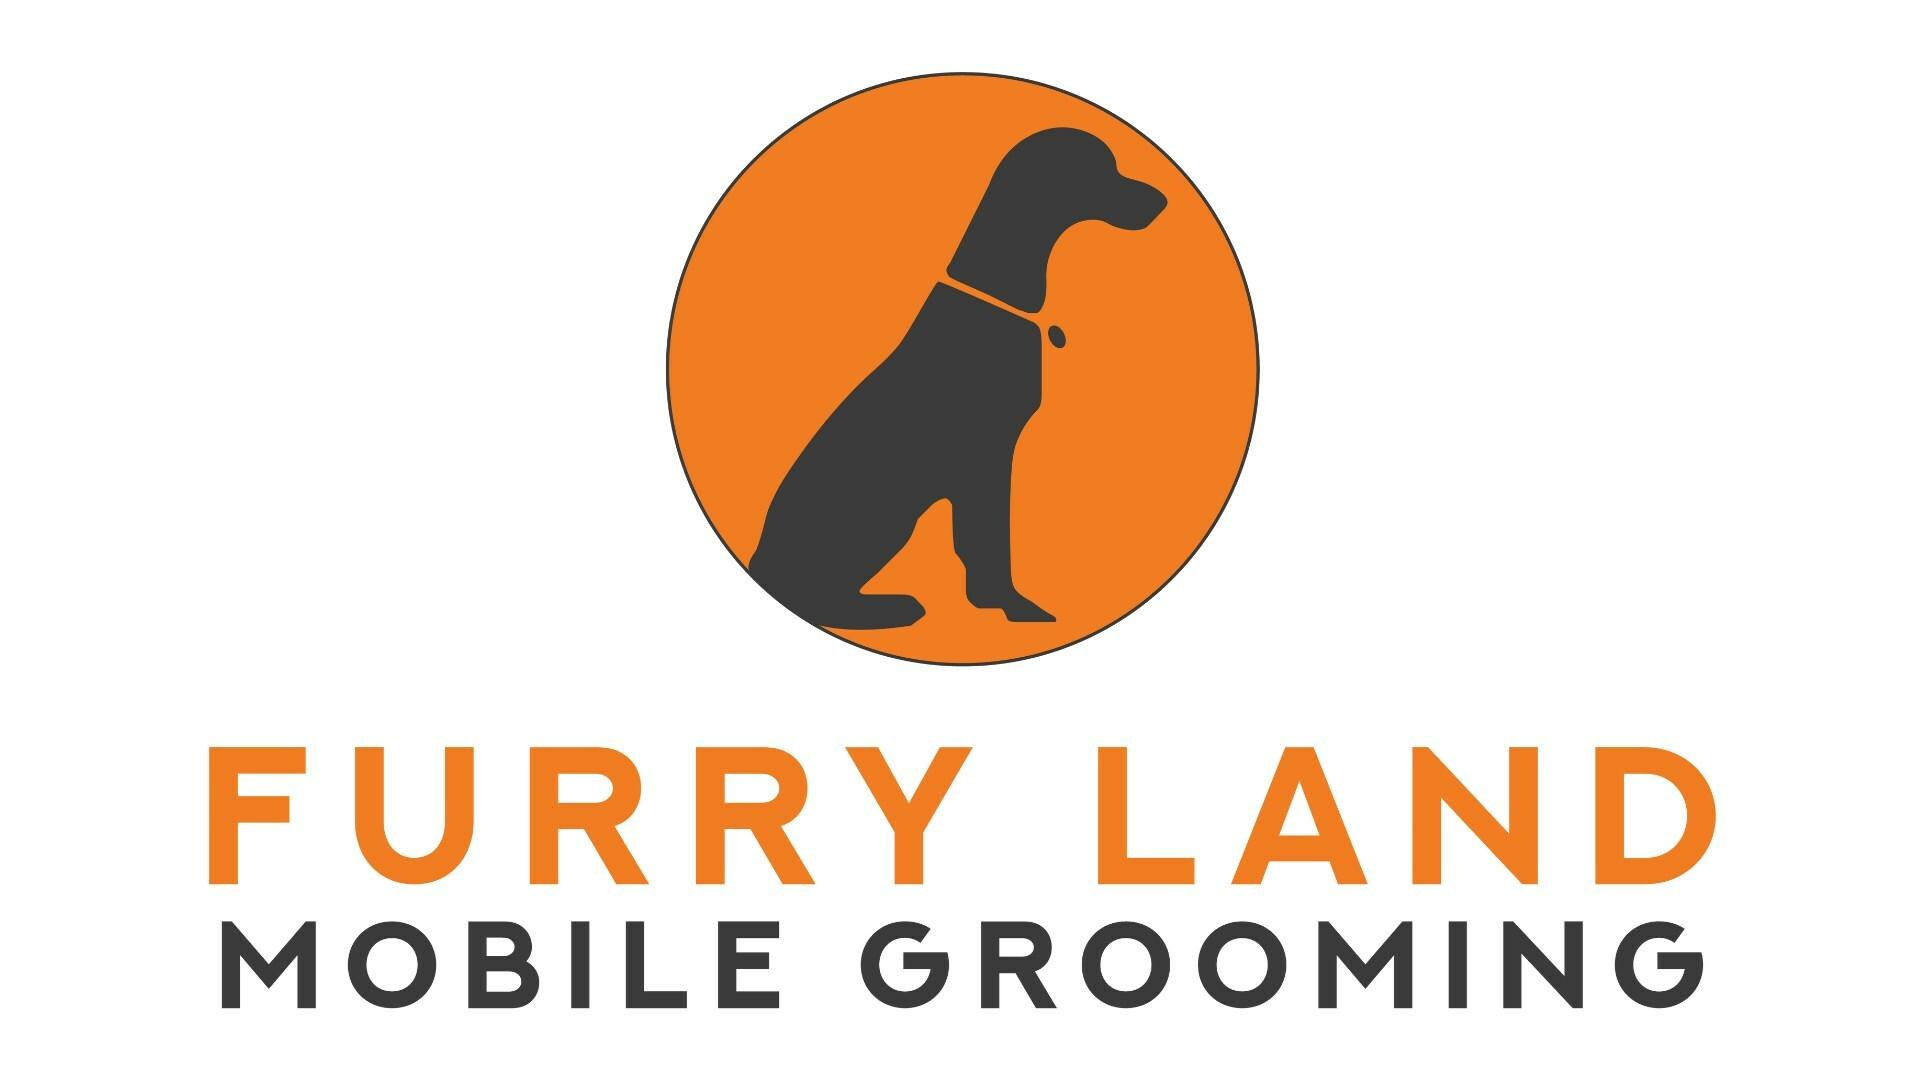 Mobile Pet Grooming Service That Pampers Pets with Convenience and Quality